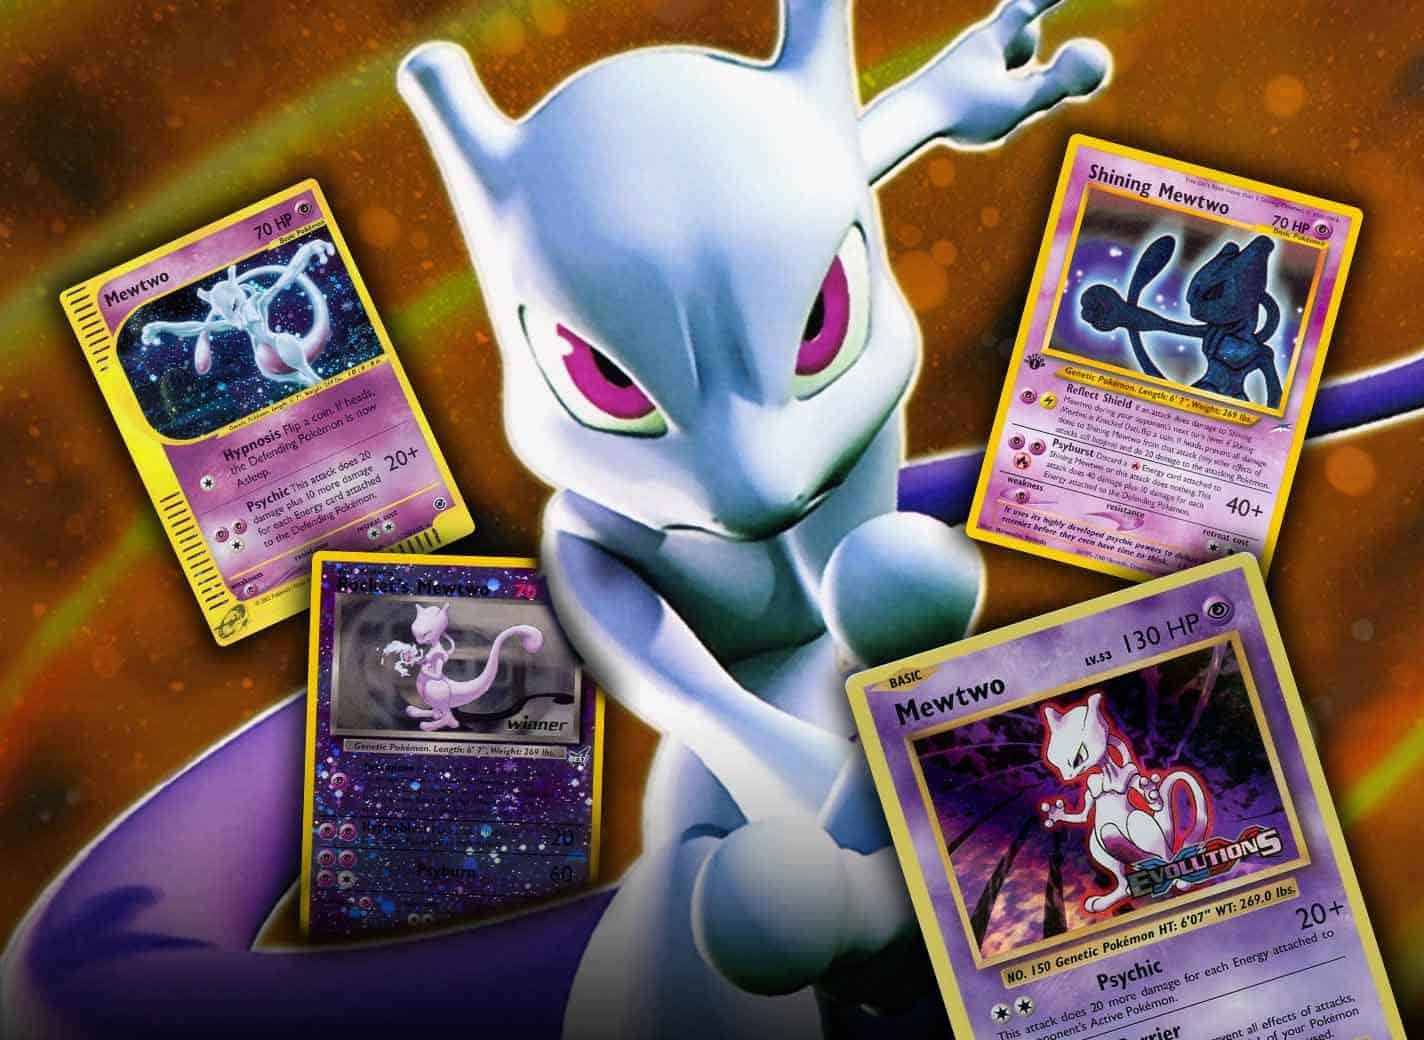 Check the actual price of your Mewtwo 10/102 Pokemon card